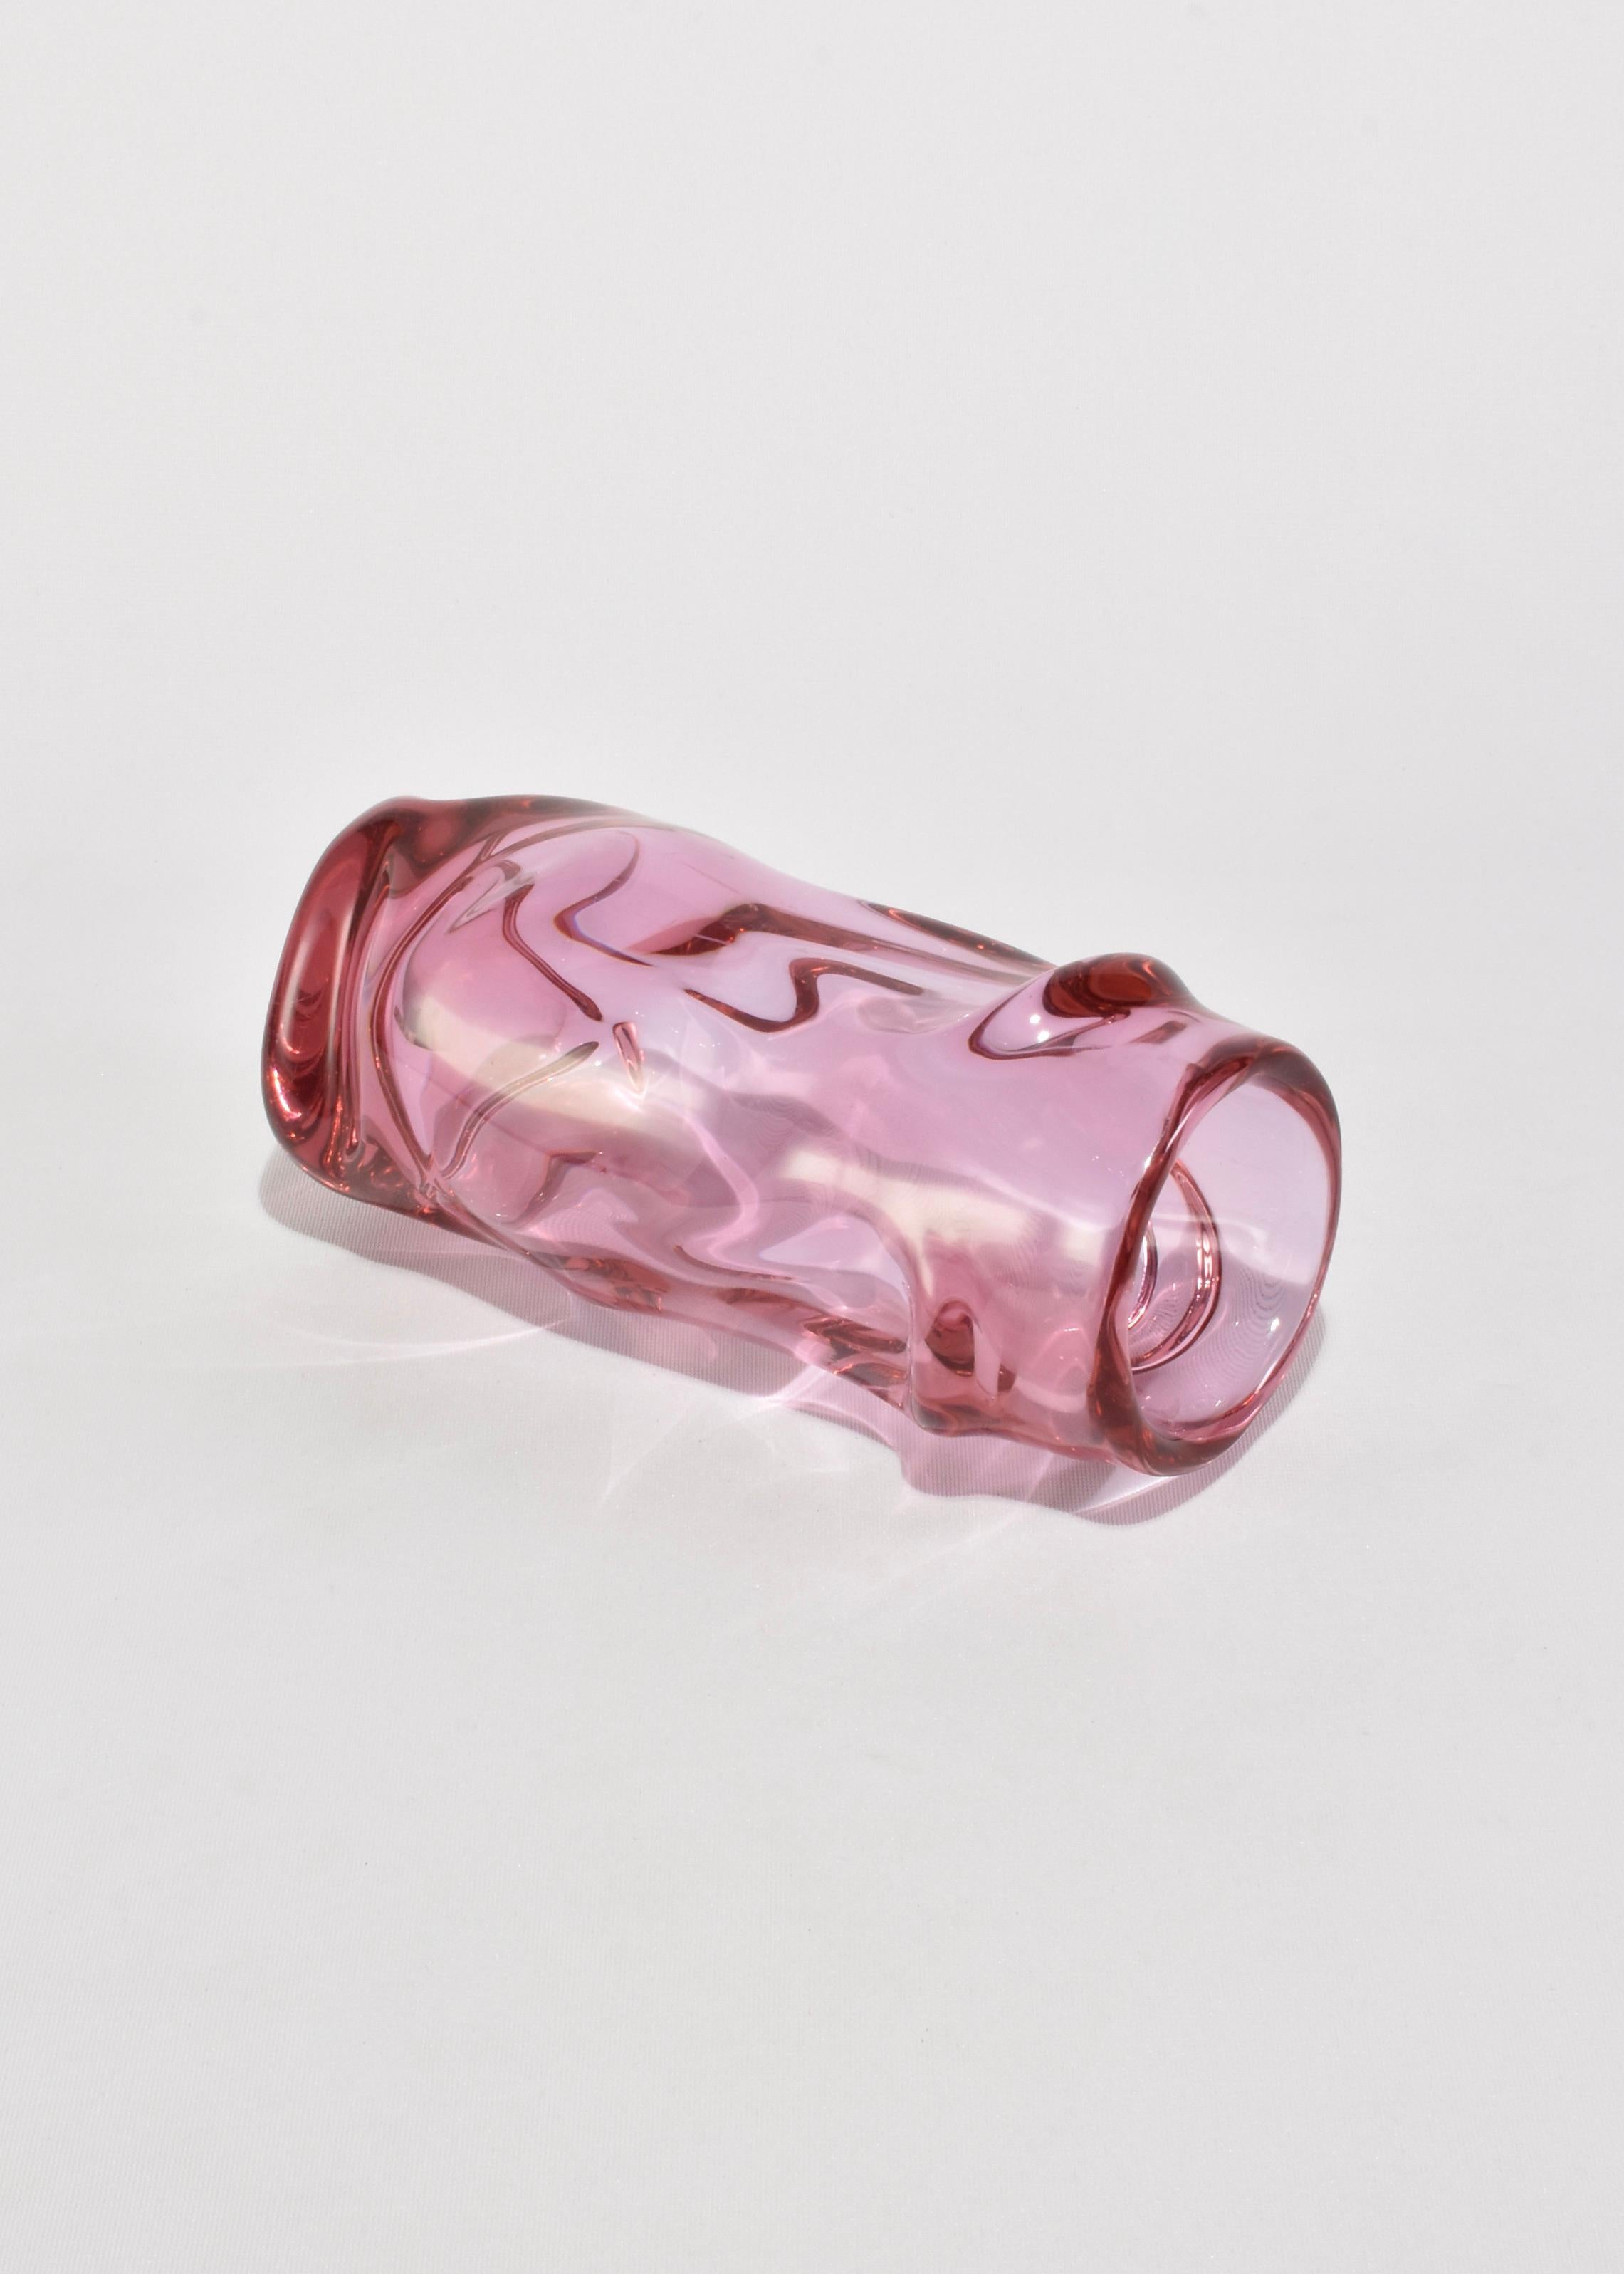 Mid-20th Century Pink Glass Vase For Sale